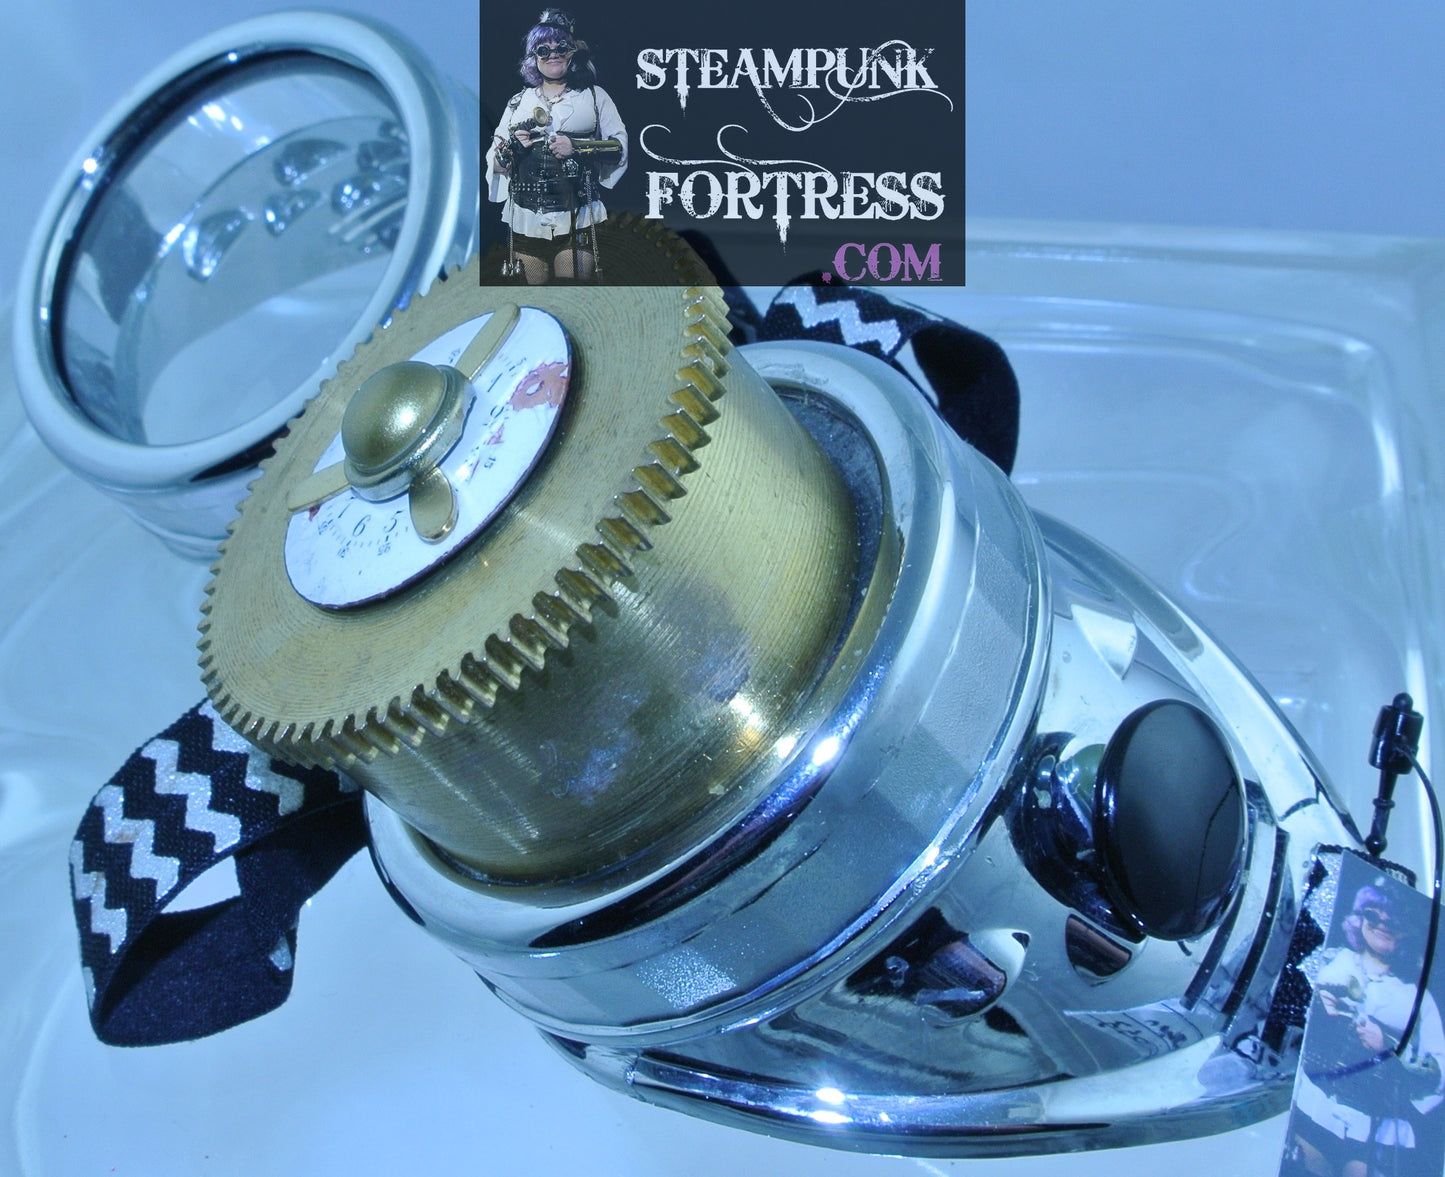 SILVER GOGGLES LEFT EYE BRASS AUTHENTIC GENUINE BARREL PORCELAIN WATCH CLOCK DIAL FACE GOLD KINETIC SPINS SPINNING PROPELLER PEARLBLACK SILVER ZIG ZAG STRETCH RIBBONS STARR WILDE STEAMPUNK FORTRESS